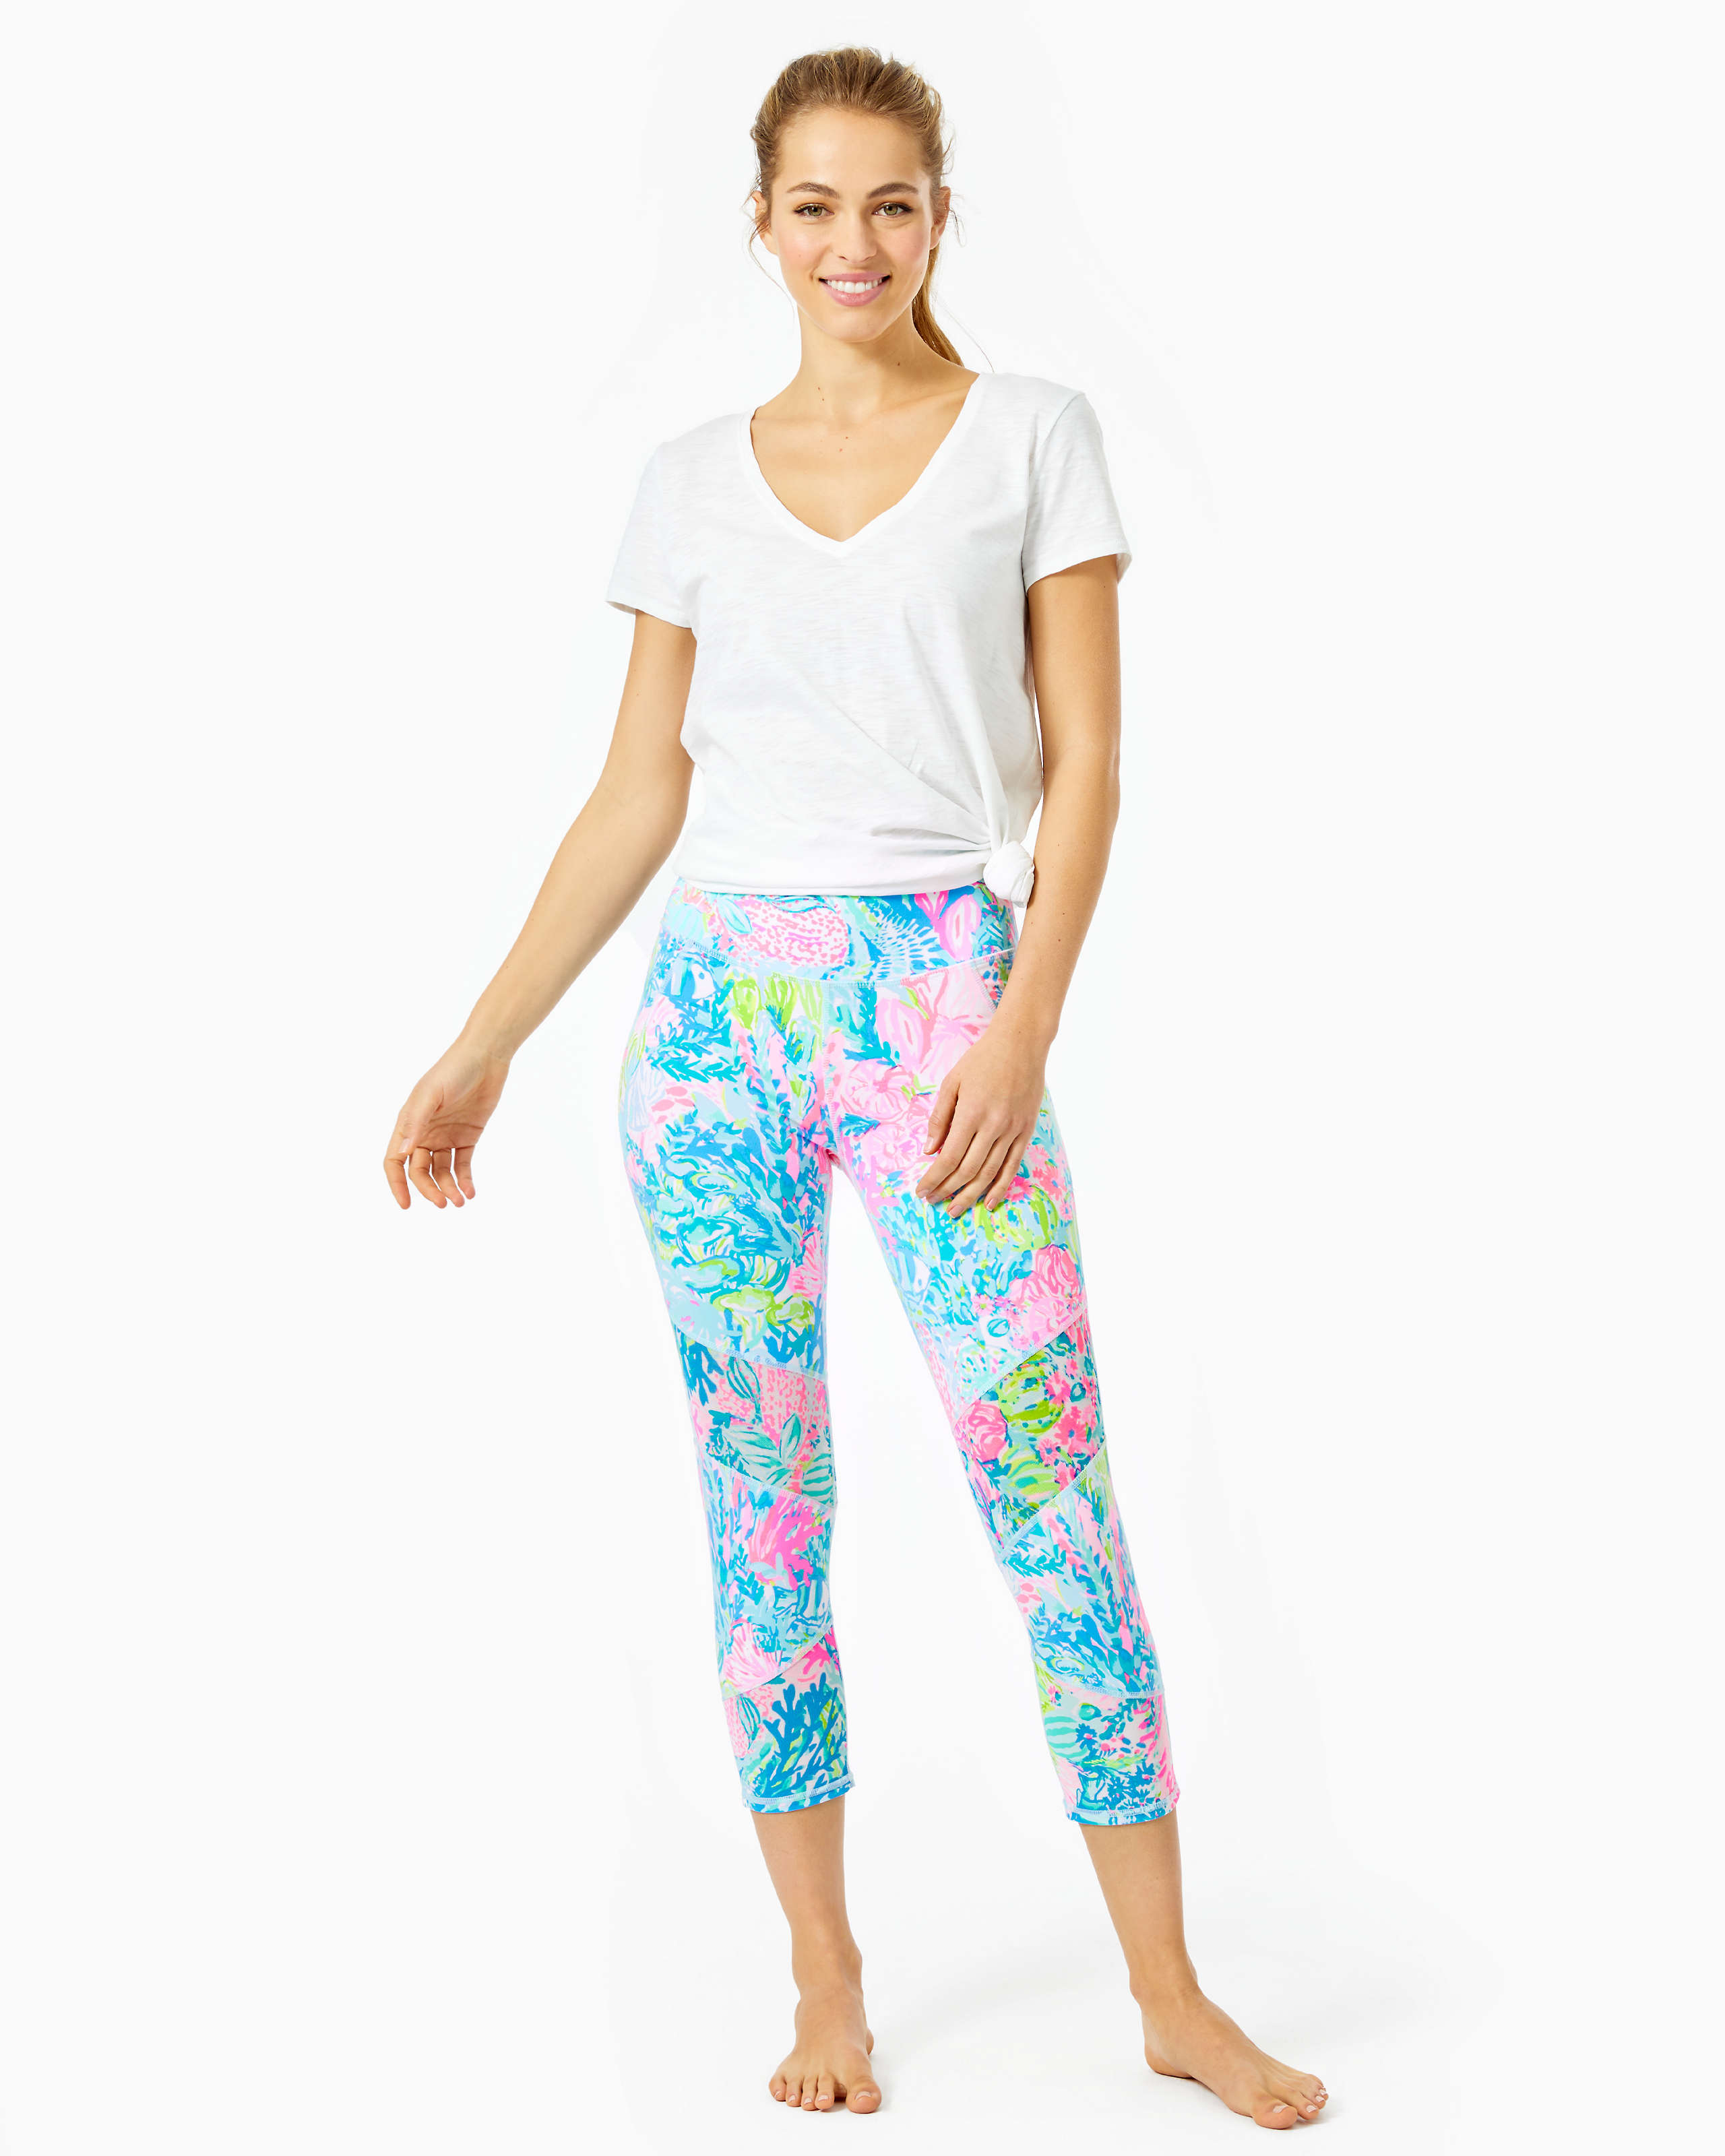 UPF 50+ Luxletic 21" Weekender High Rise Crop Pant, Multi Fished My Wish, large - Lilly Pulitzer Zoomed